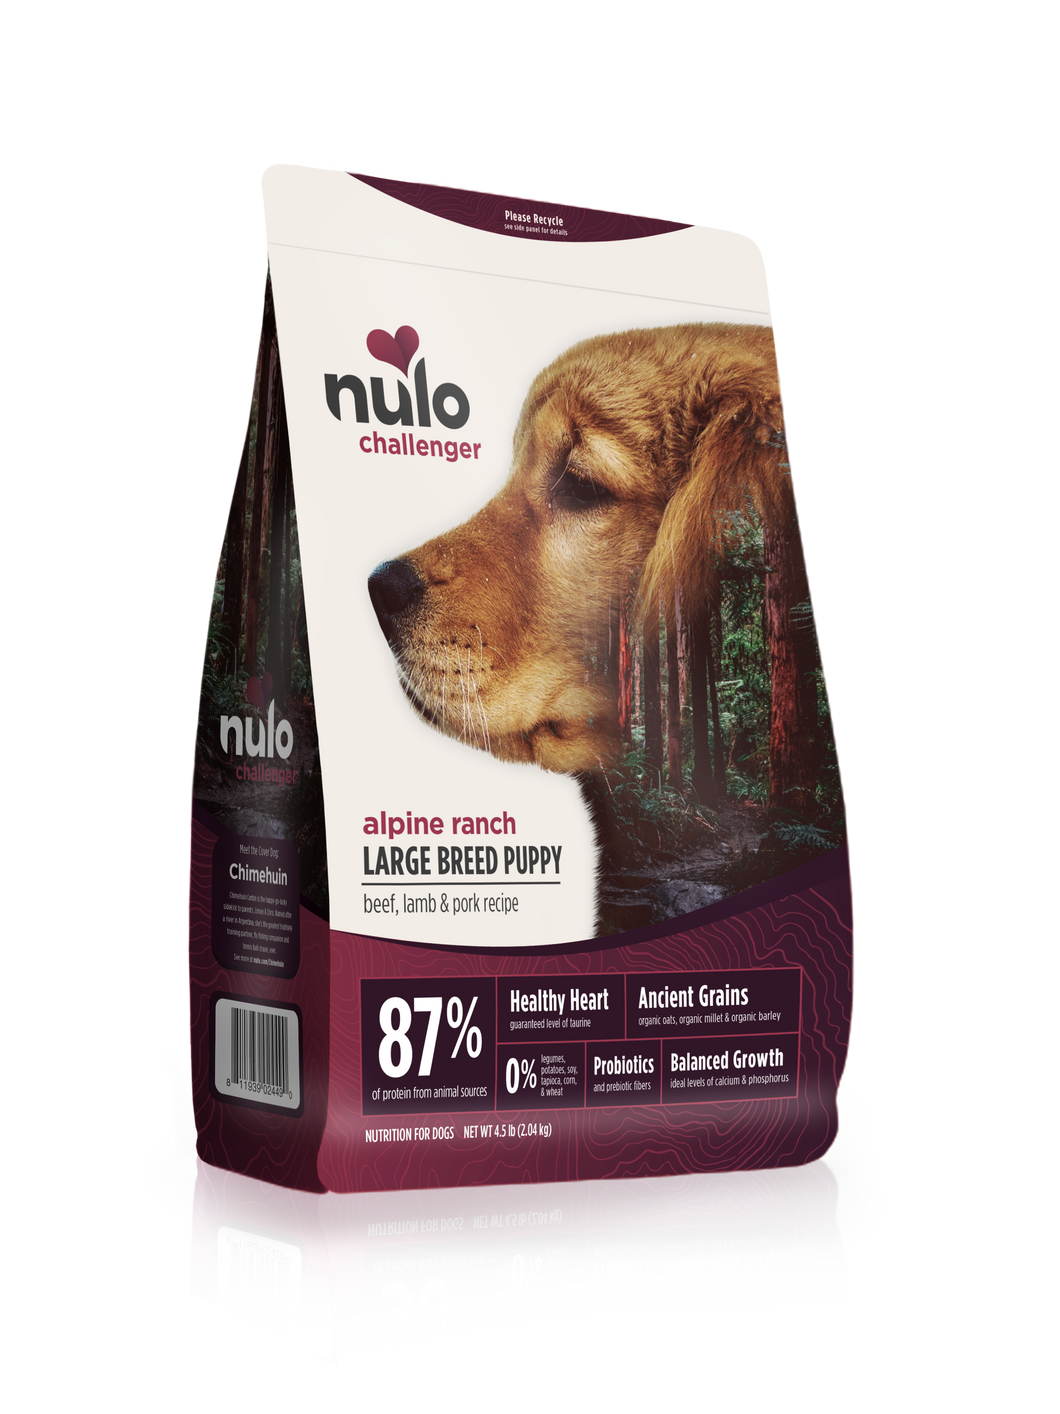 Nulo Challenger Alpine Ranch Large Breed Puppy Beef, Lamb, and Pork Dry Dog Food